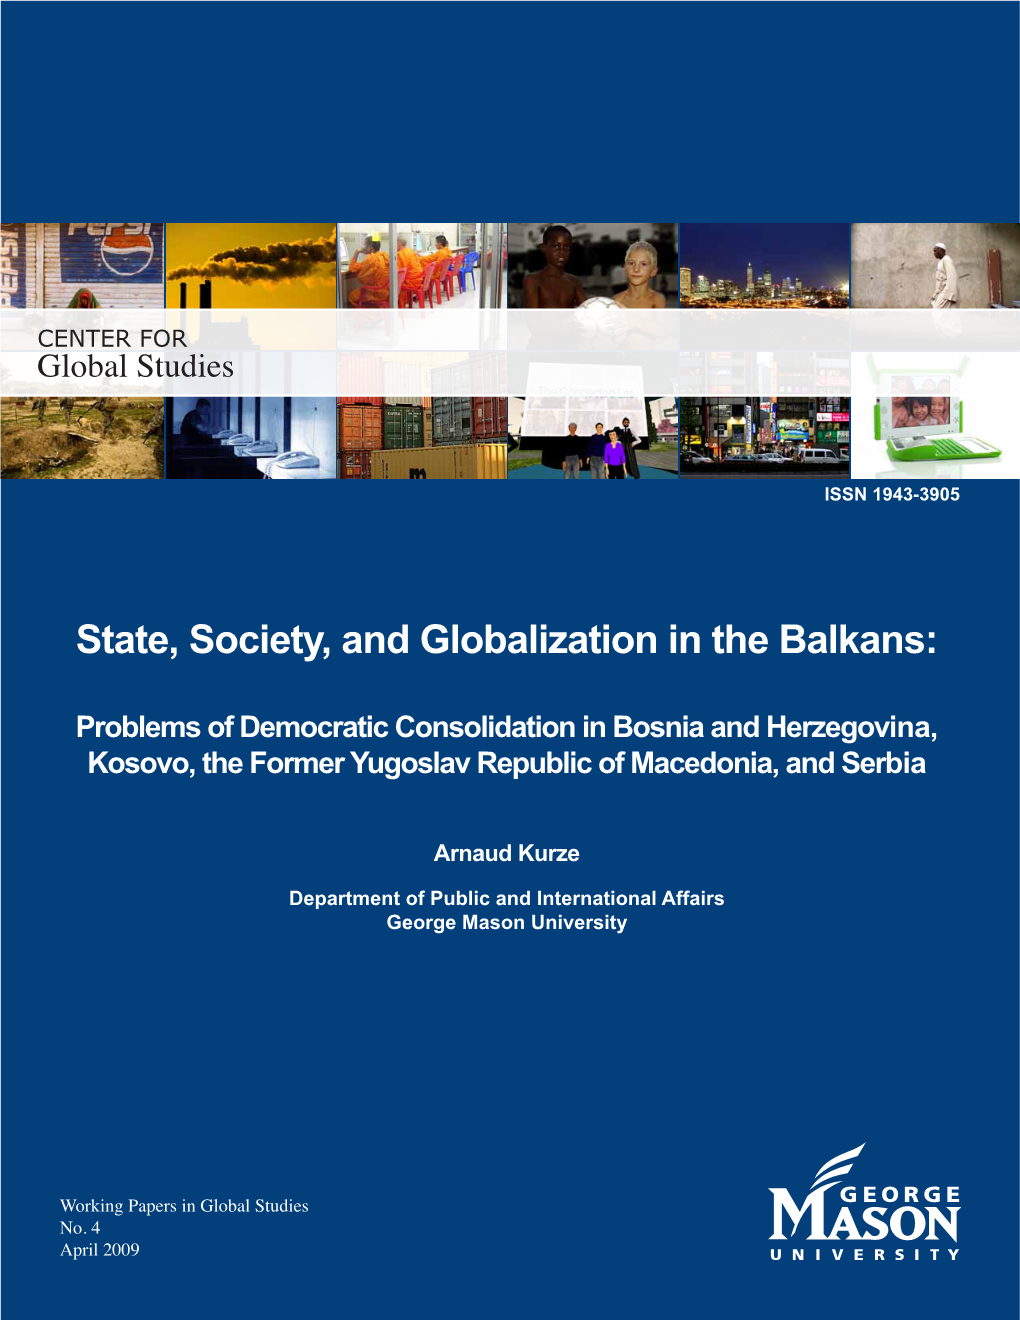 State, Society, and Globalization in the Balkans